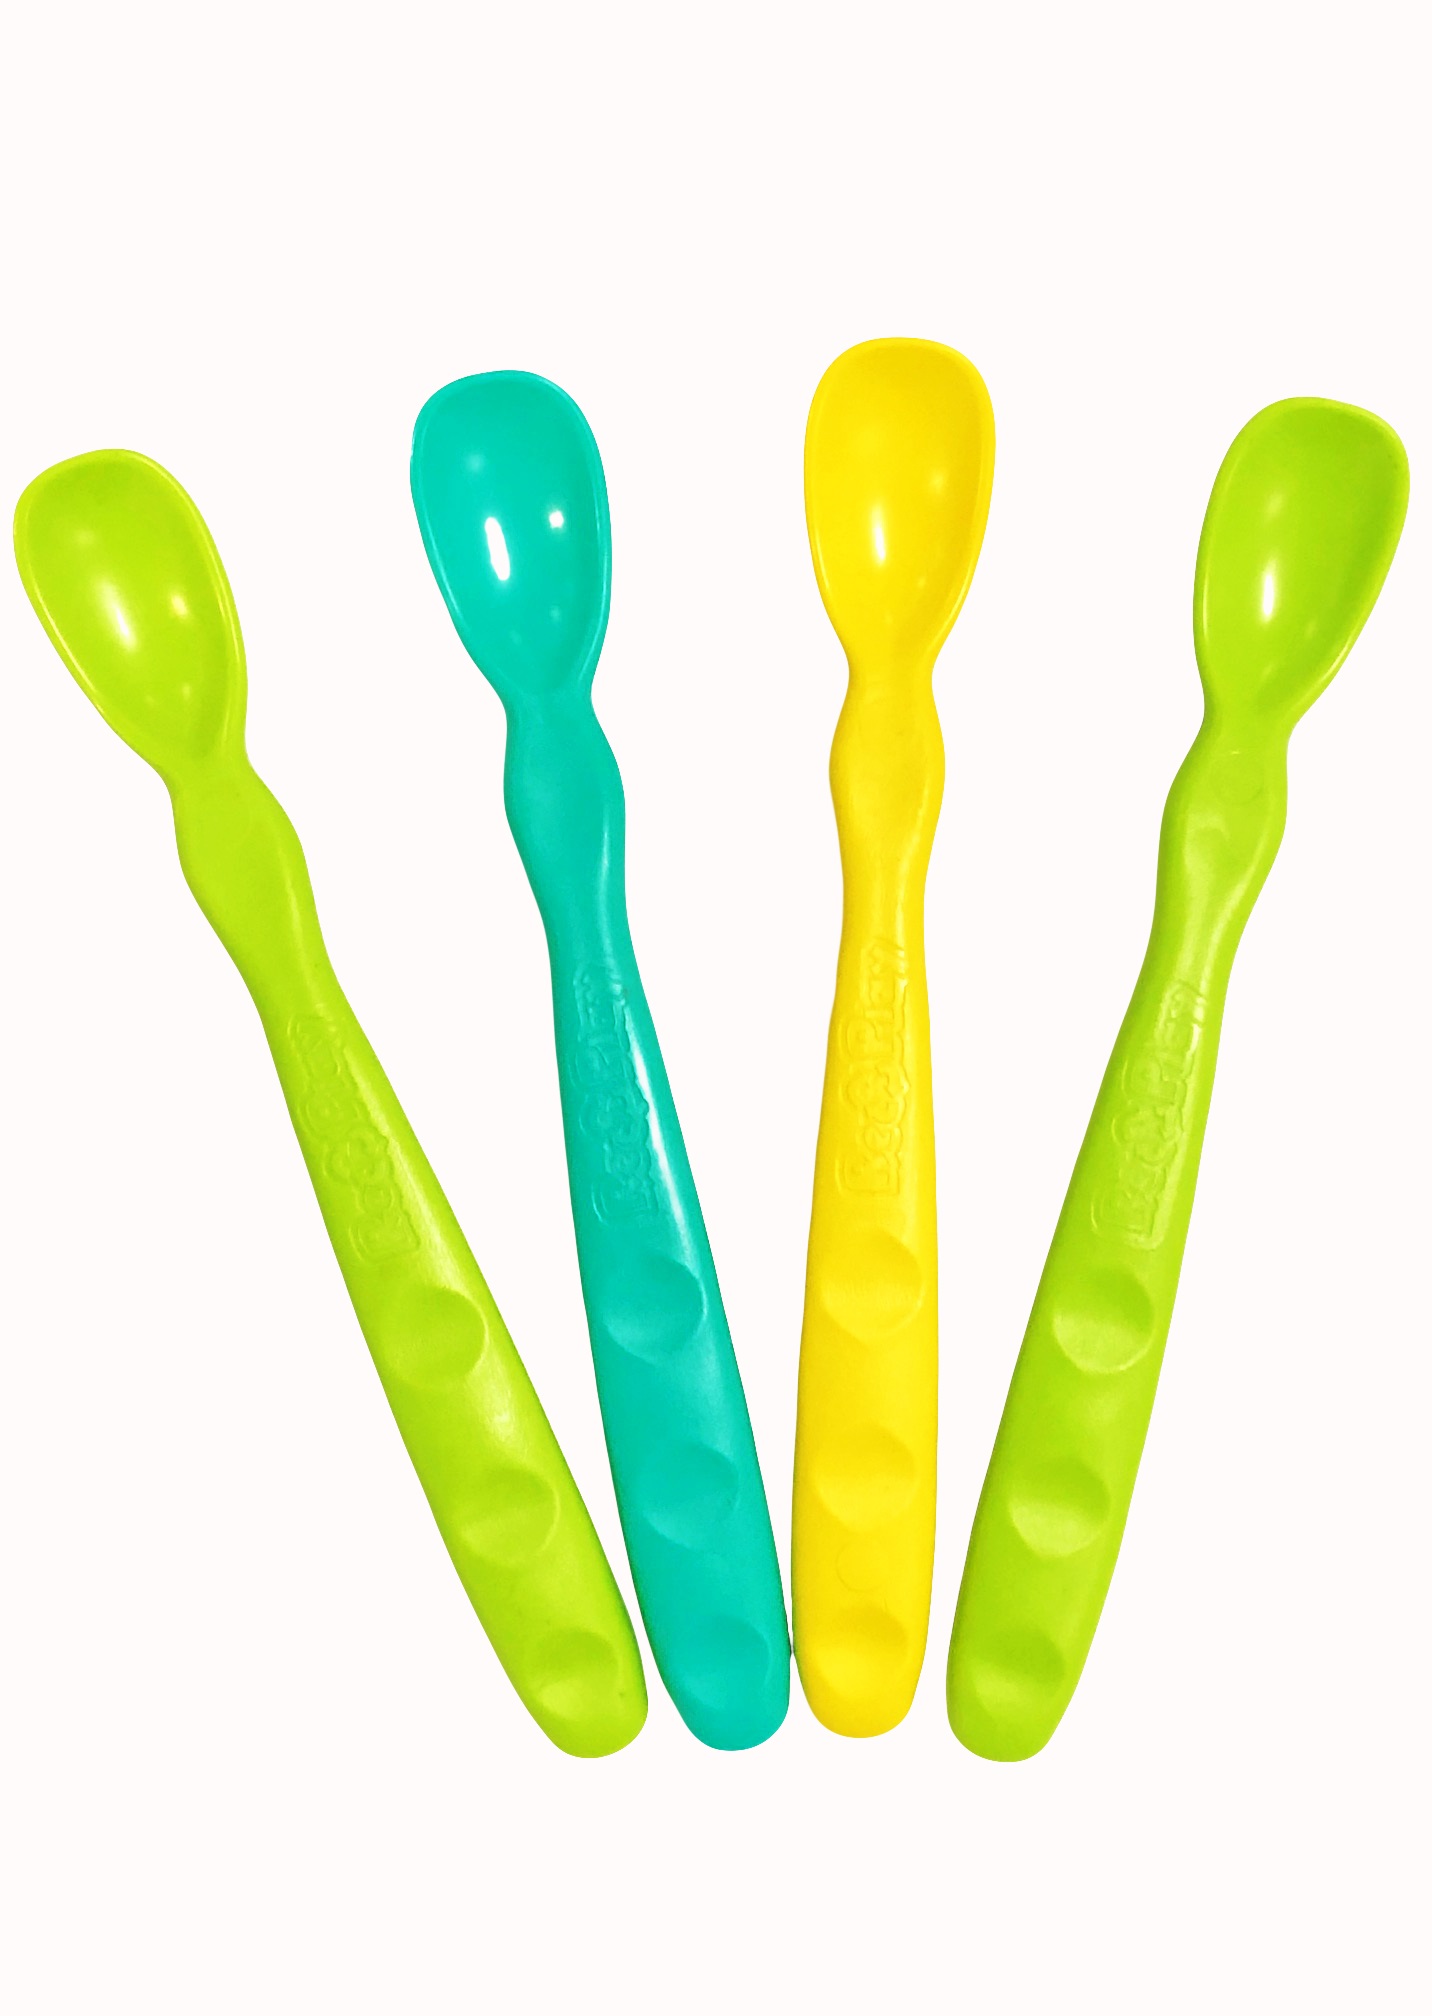 replay-infant-spoons-4pk-blue